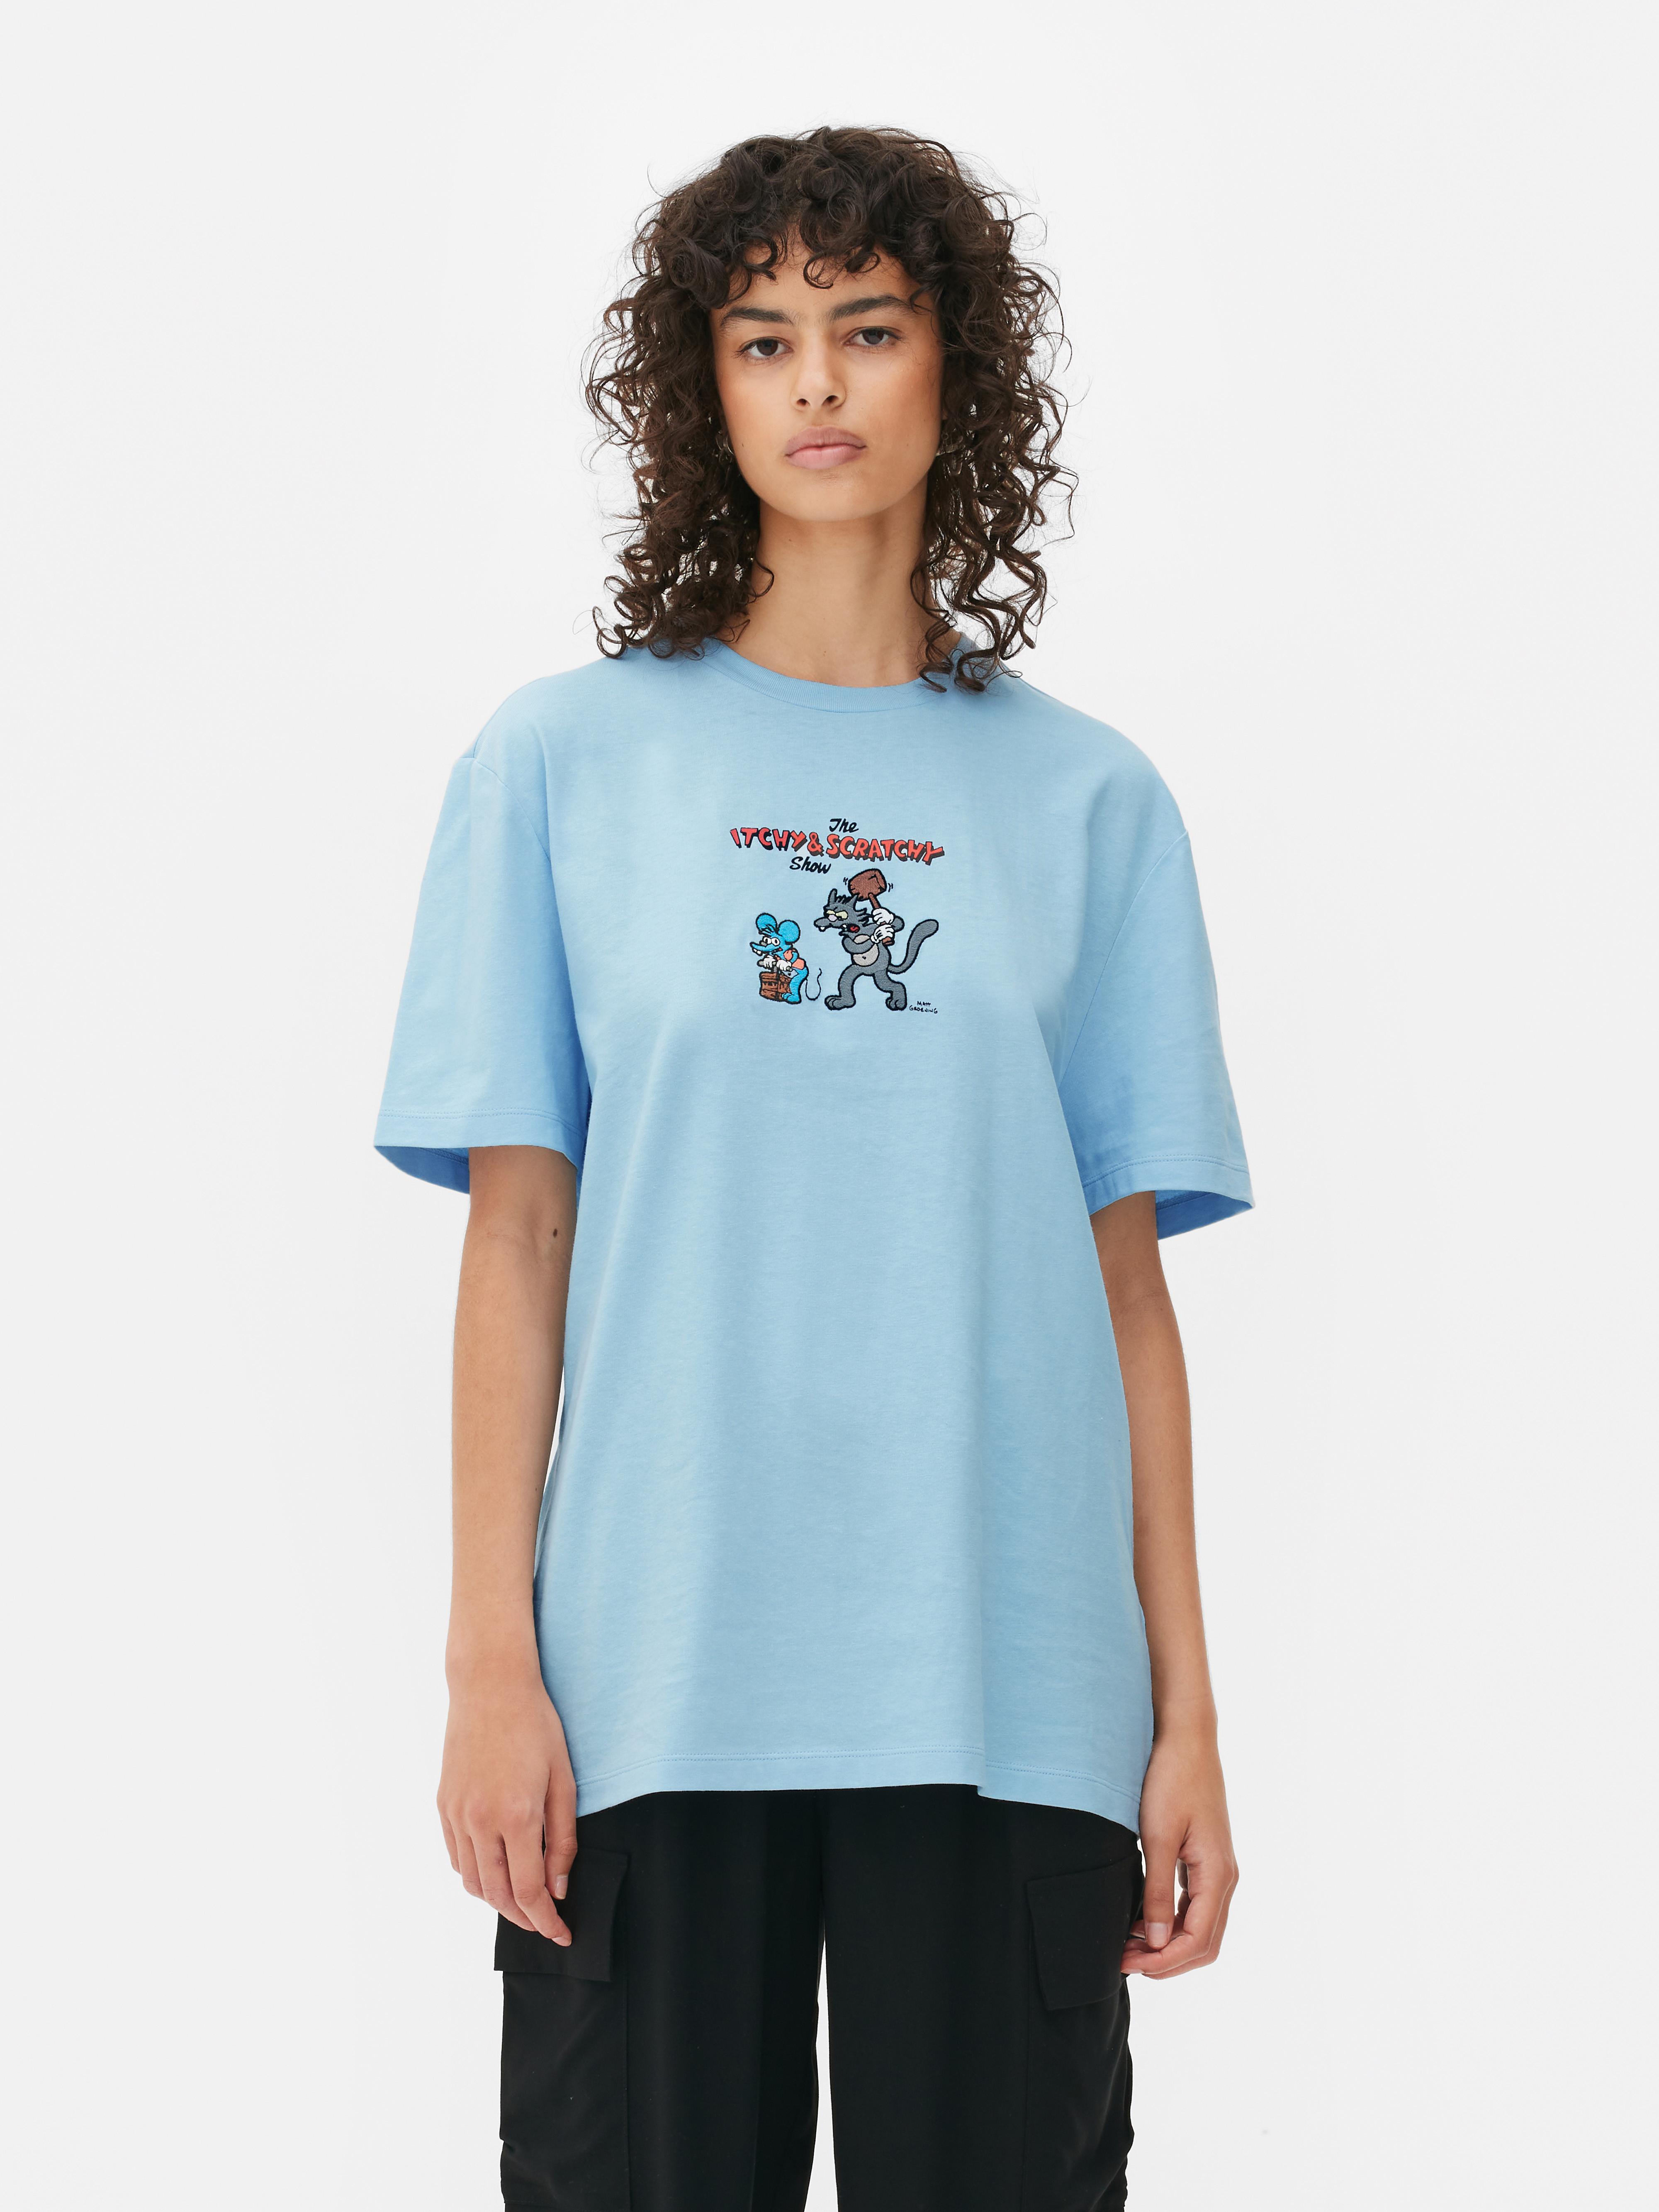 The Simpsons Itchy & Scratchy T-shirt | Penneys